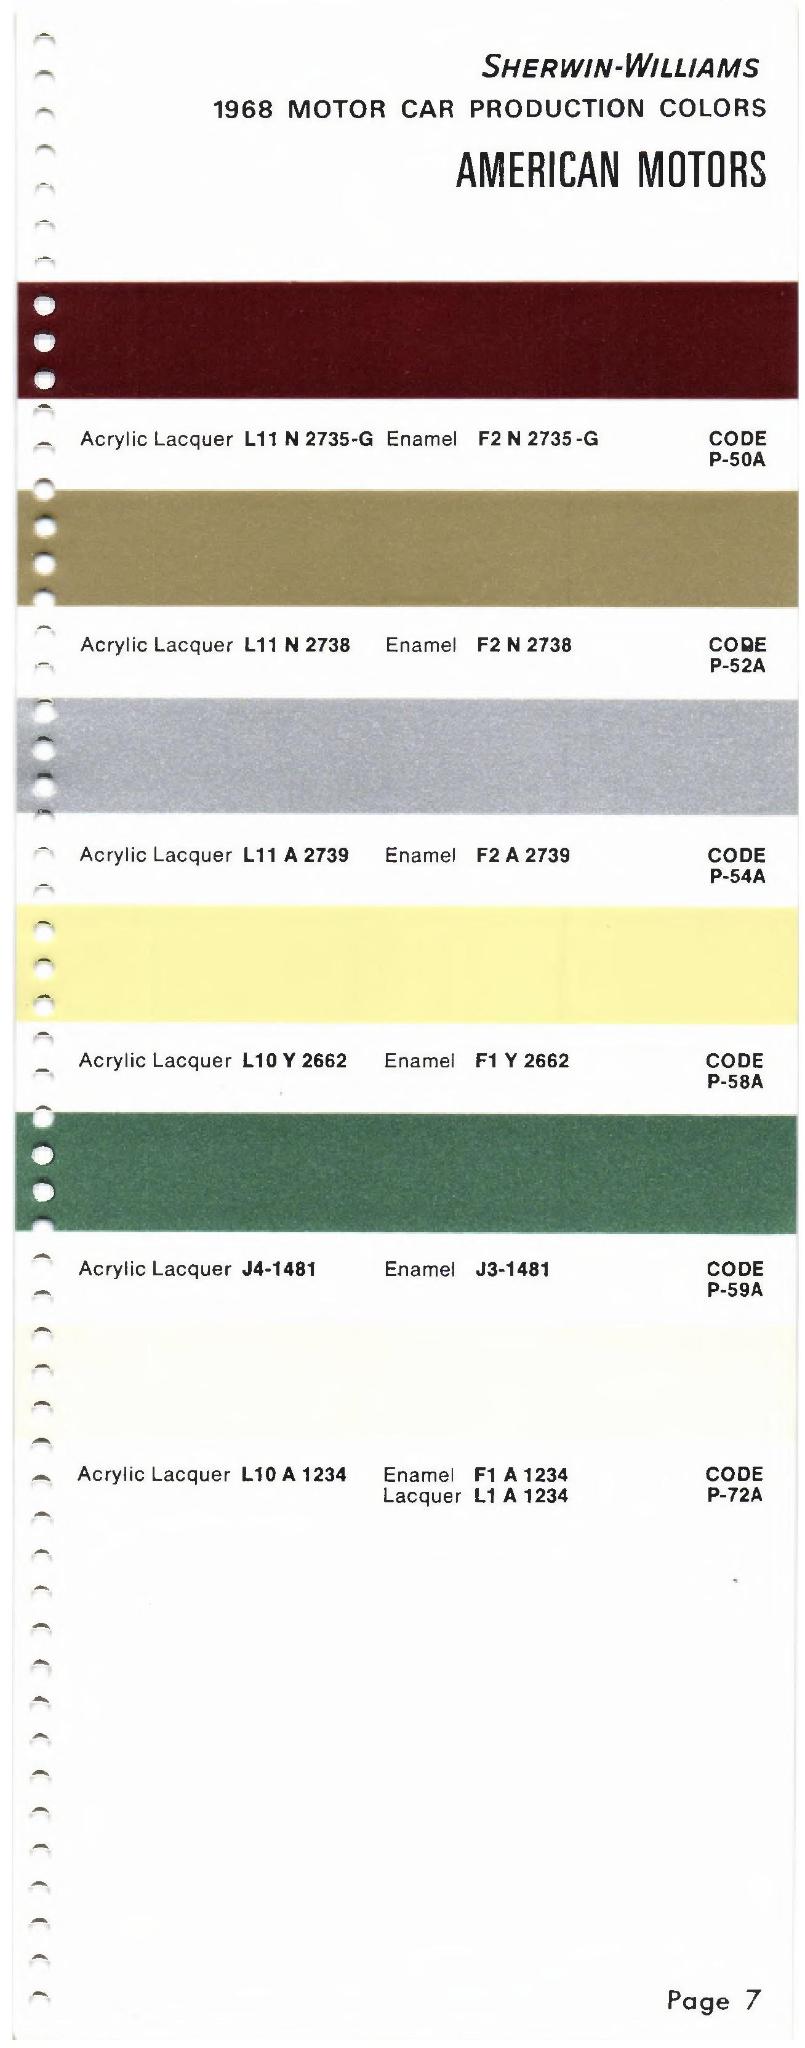 Paint Colors and Paint Codes Used on AMC Vehicles